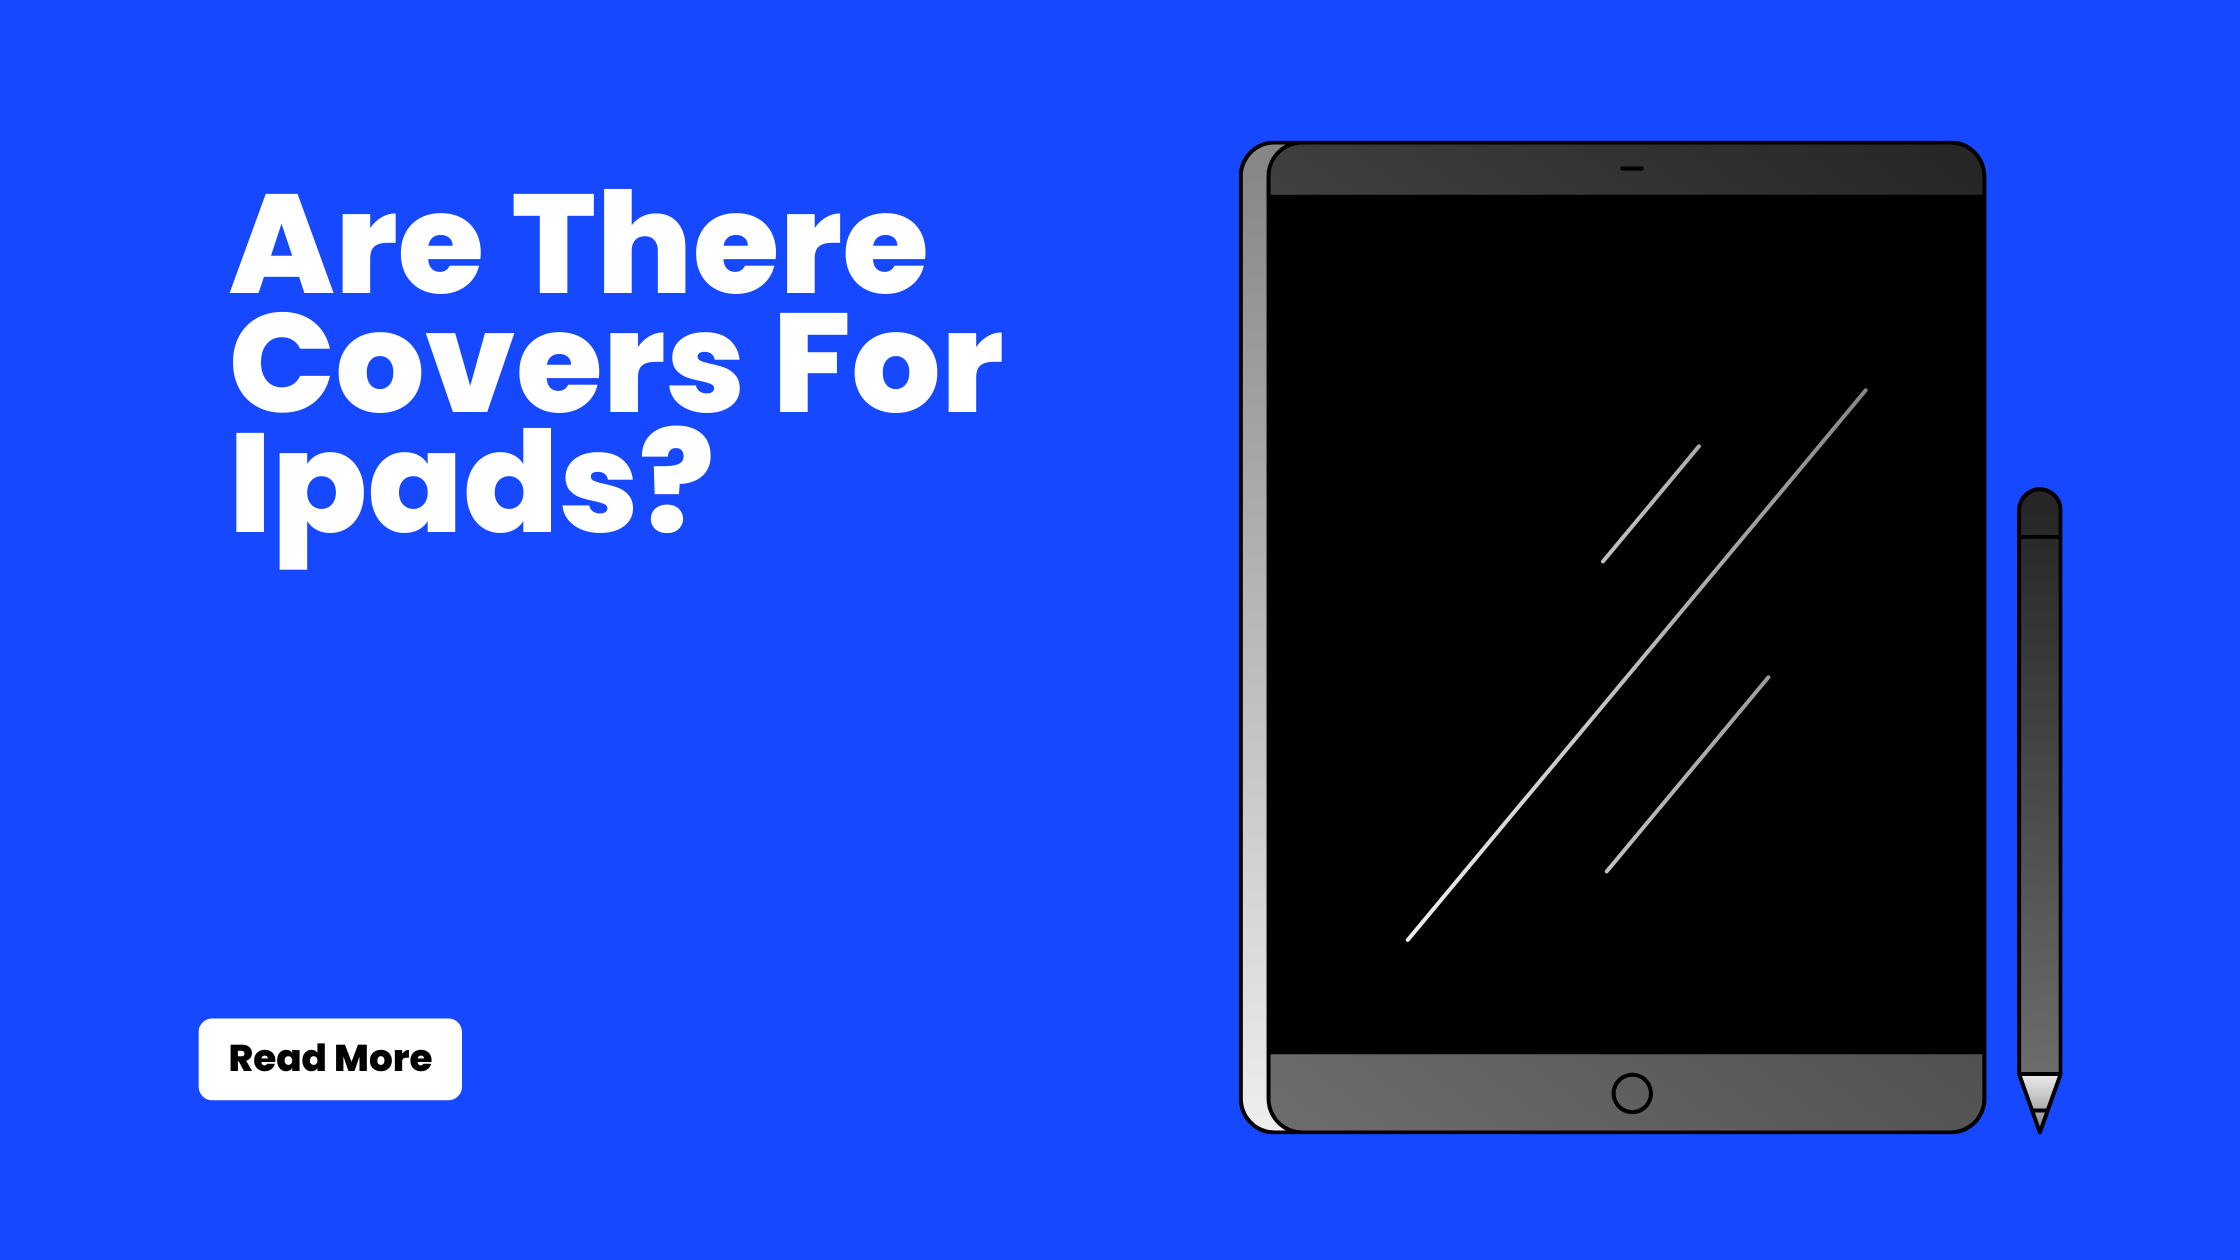 Are There Covers For Ipads?